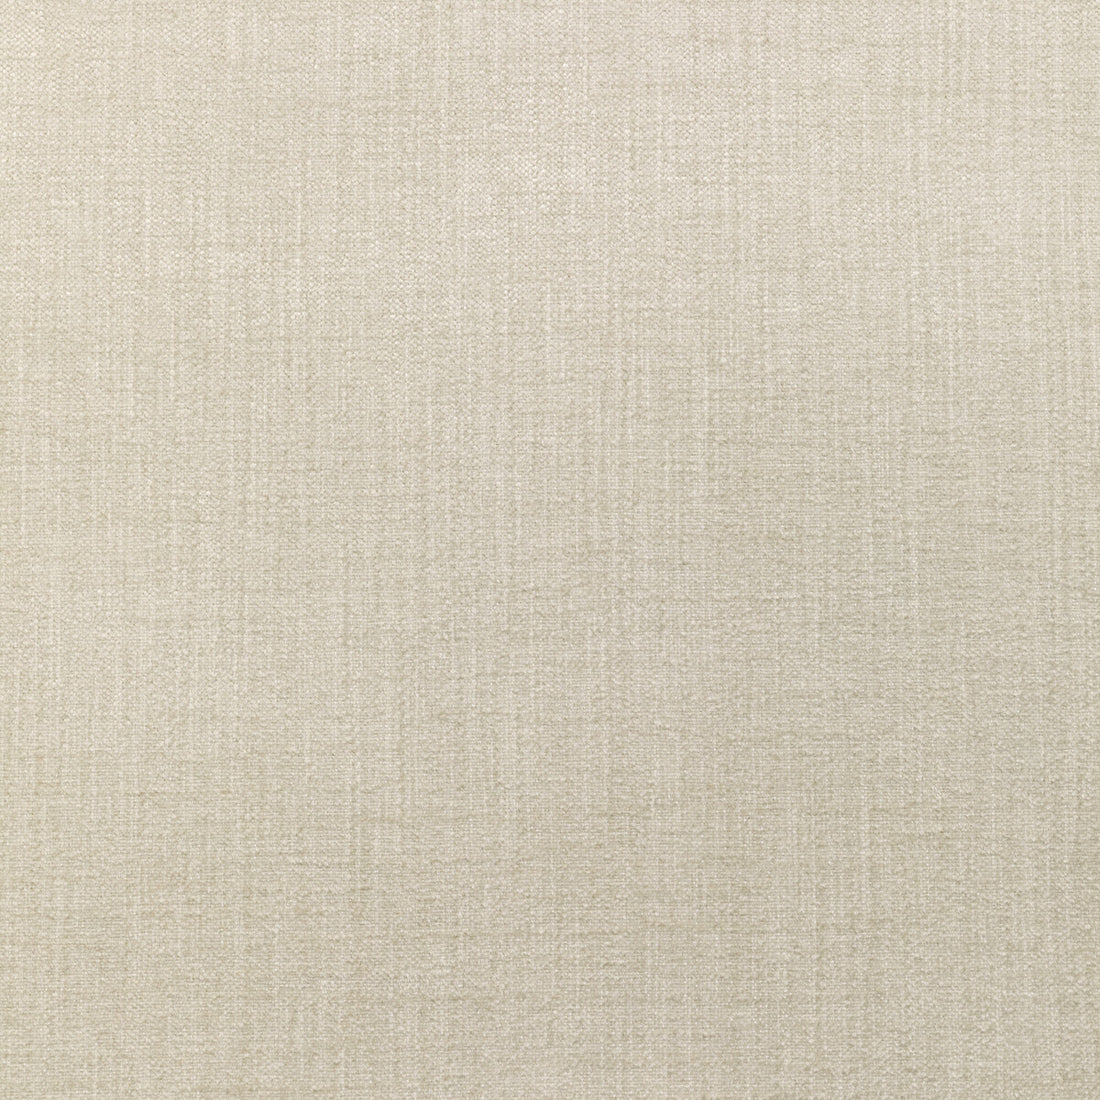 Accommodate fabric in husky color - pattern 36255.1.0 - by Kravet Contract in the Supreen collection